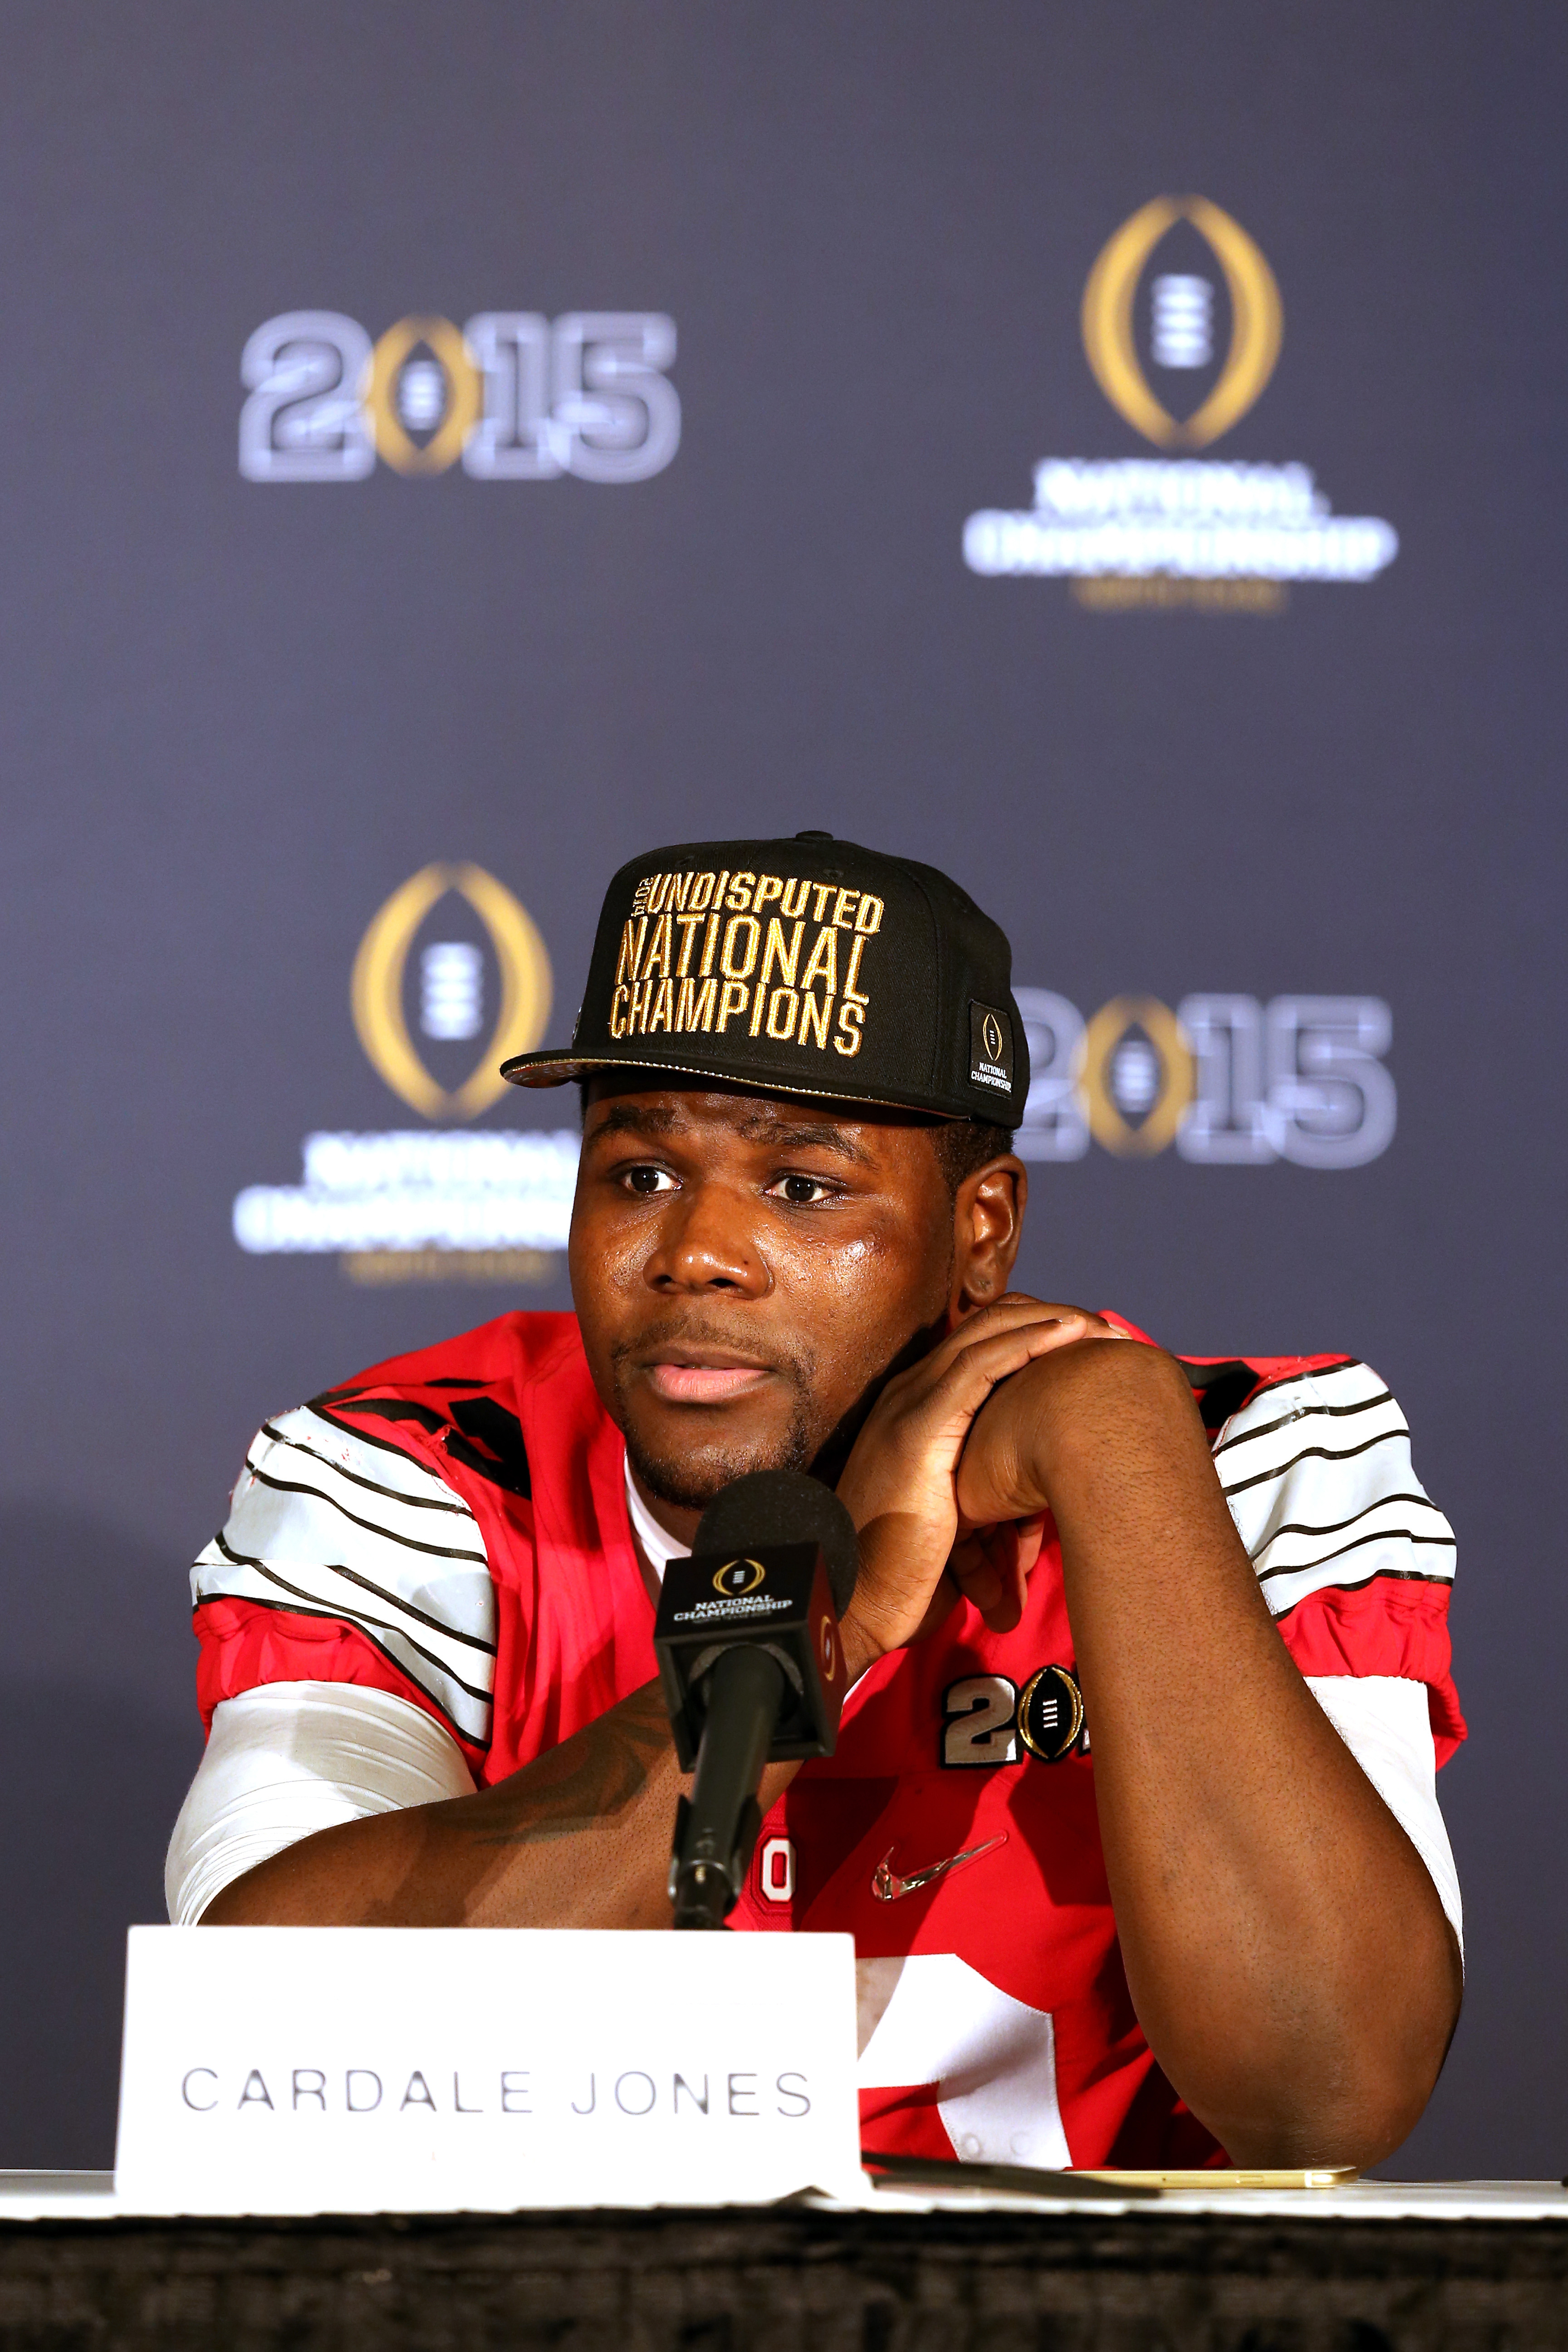 Quarterback Cardale Jones #12 of the Ohio State Buckeyes talks to the media after defeating the Oregon Ducks in the College Football Playoff National Championship Game at AT&amp;T Stadium on January 12, 2015 in Arlington, Texas.  The Ohio State Buckeyes defeated the Oregon Ducks 42 to 20. (Sarah Glenn&mdash;Getty Images)